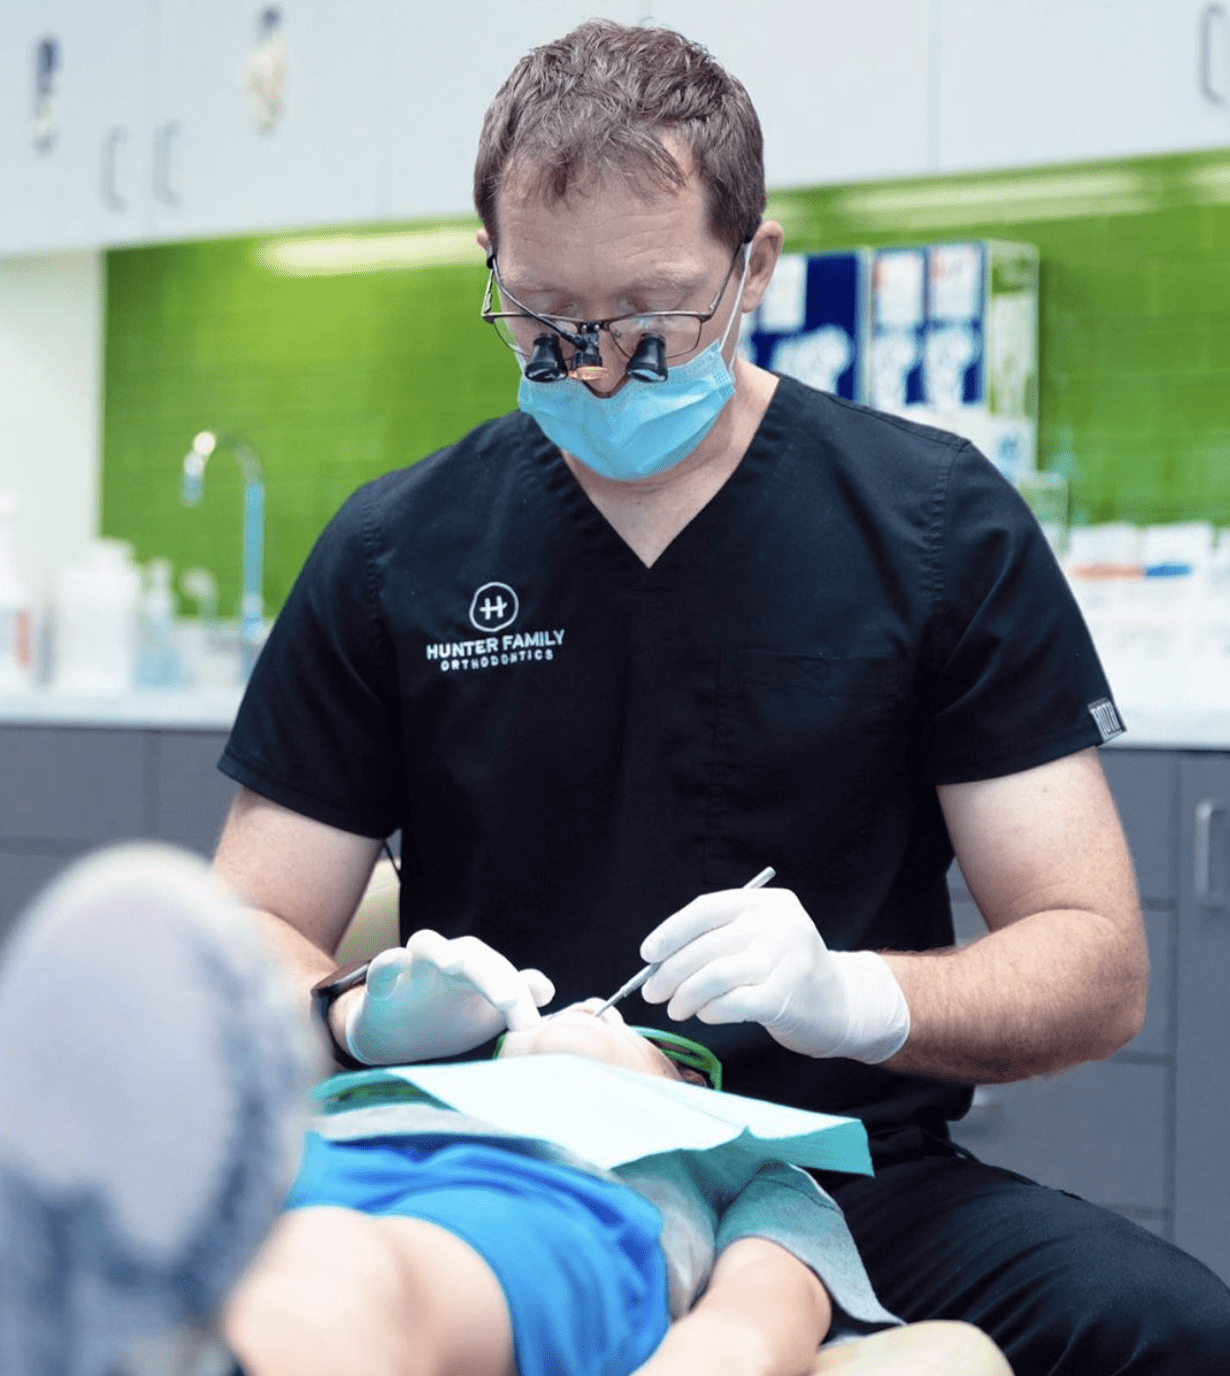 The Difference Between an Orthodontist and a Dentist